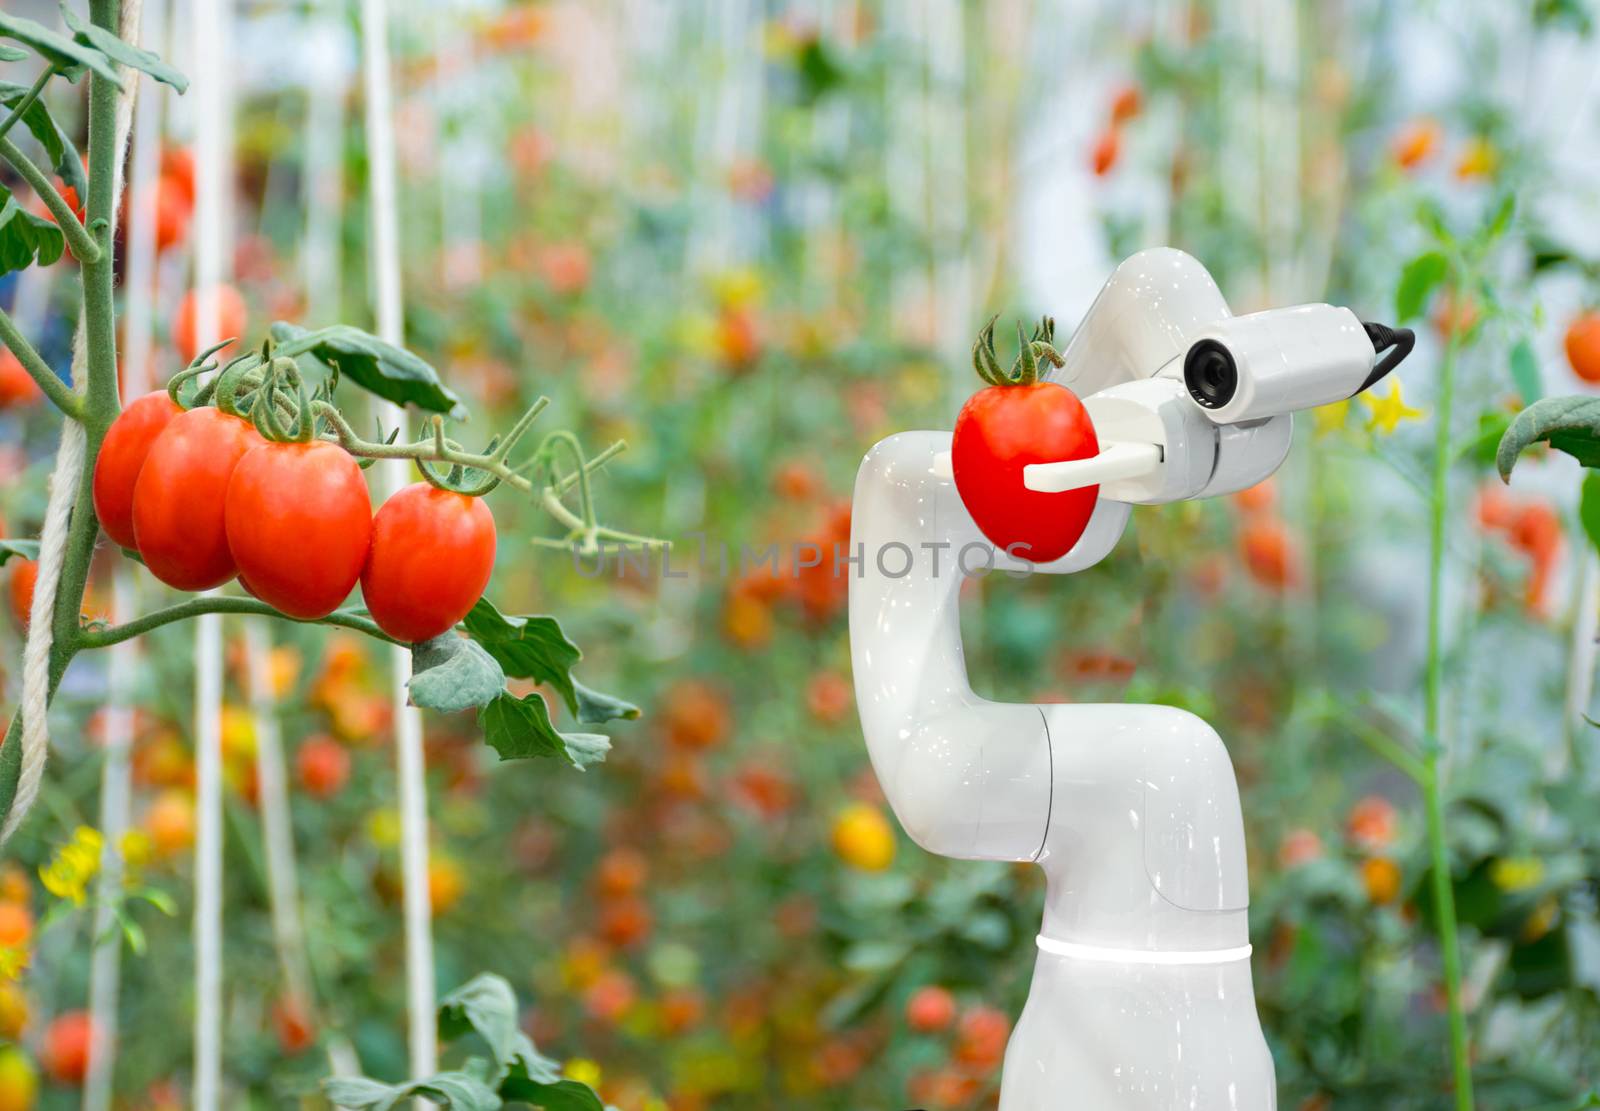 Smart robotic farmers tomato in agriculture futuristic robot automation to work to increase efficiency by sompongtom